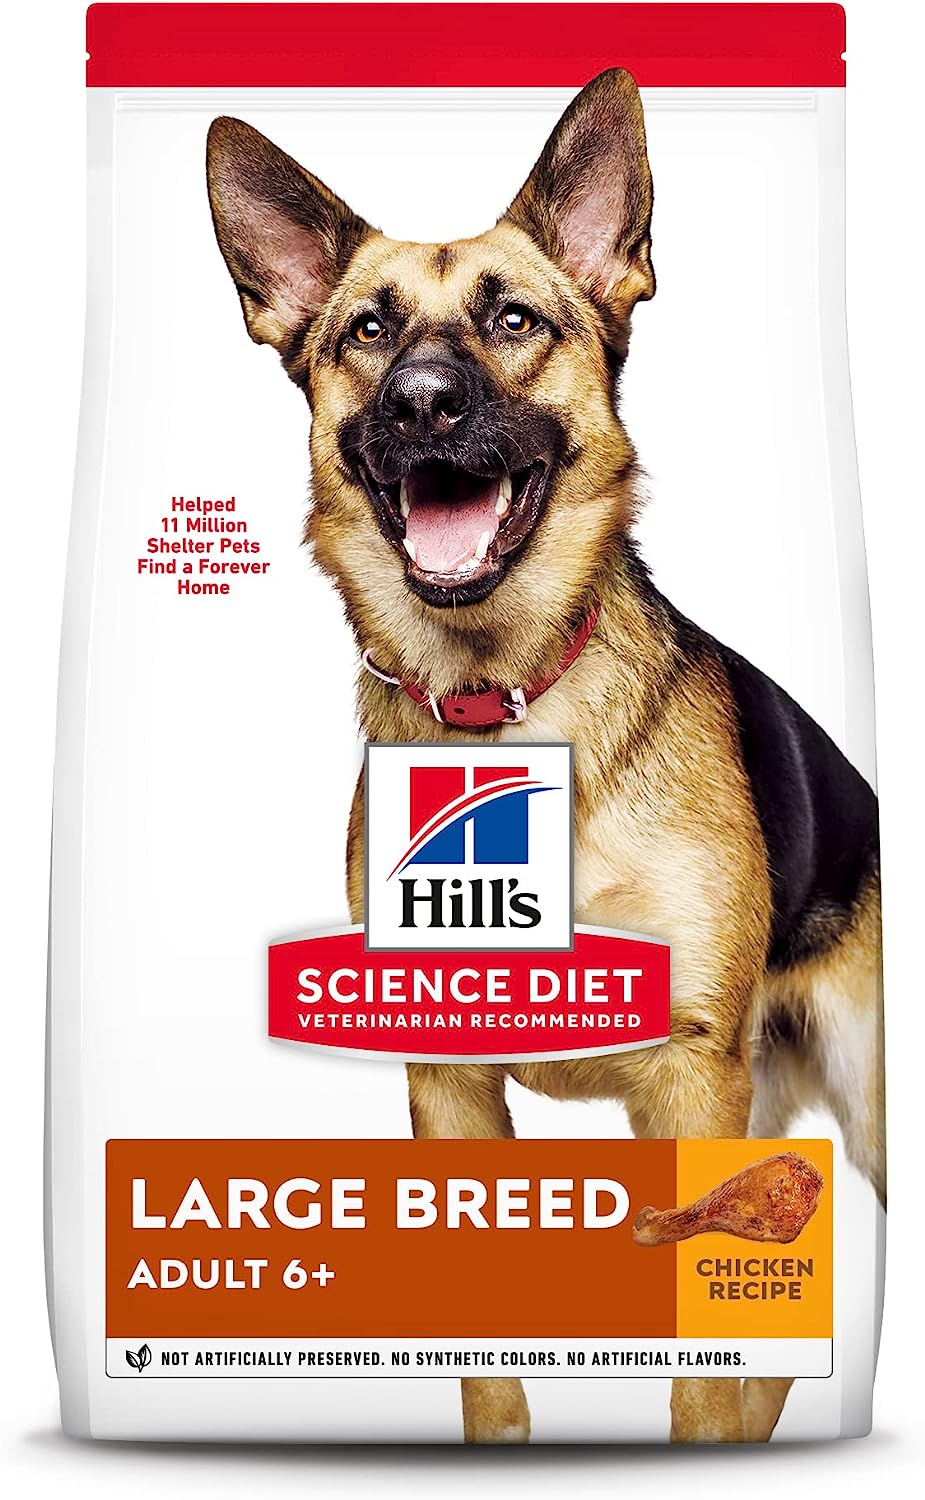 Hill’s Science Diet Adult 6+ Large Breed Chicken Meal, Barley & Rice Recipe Dry Dog Food – Gallery Image 1